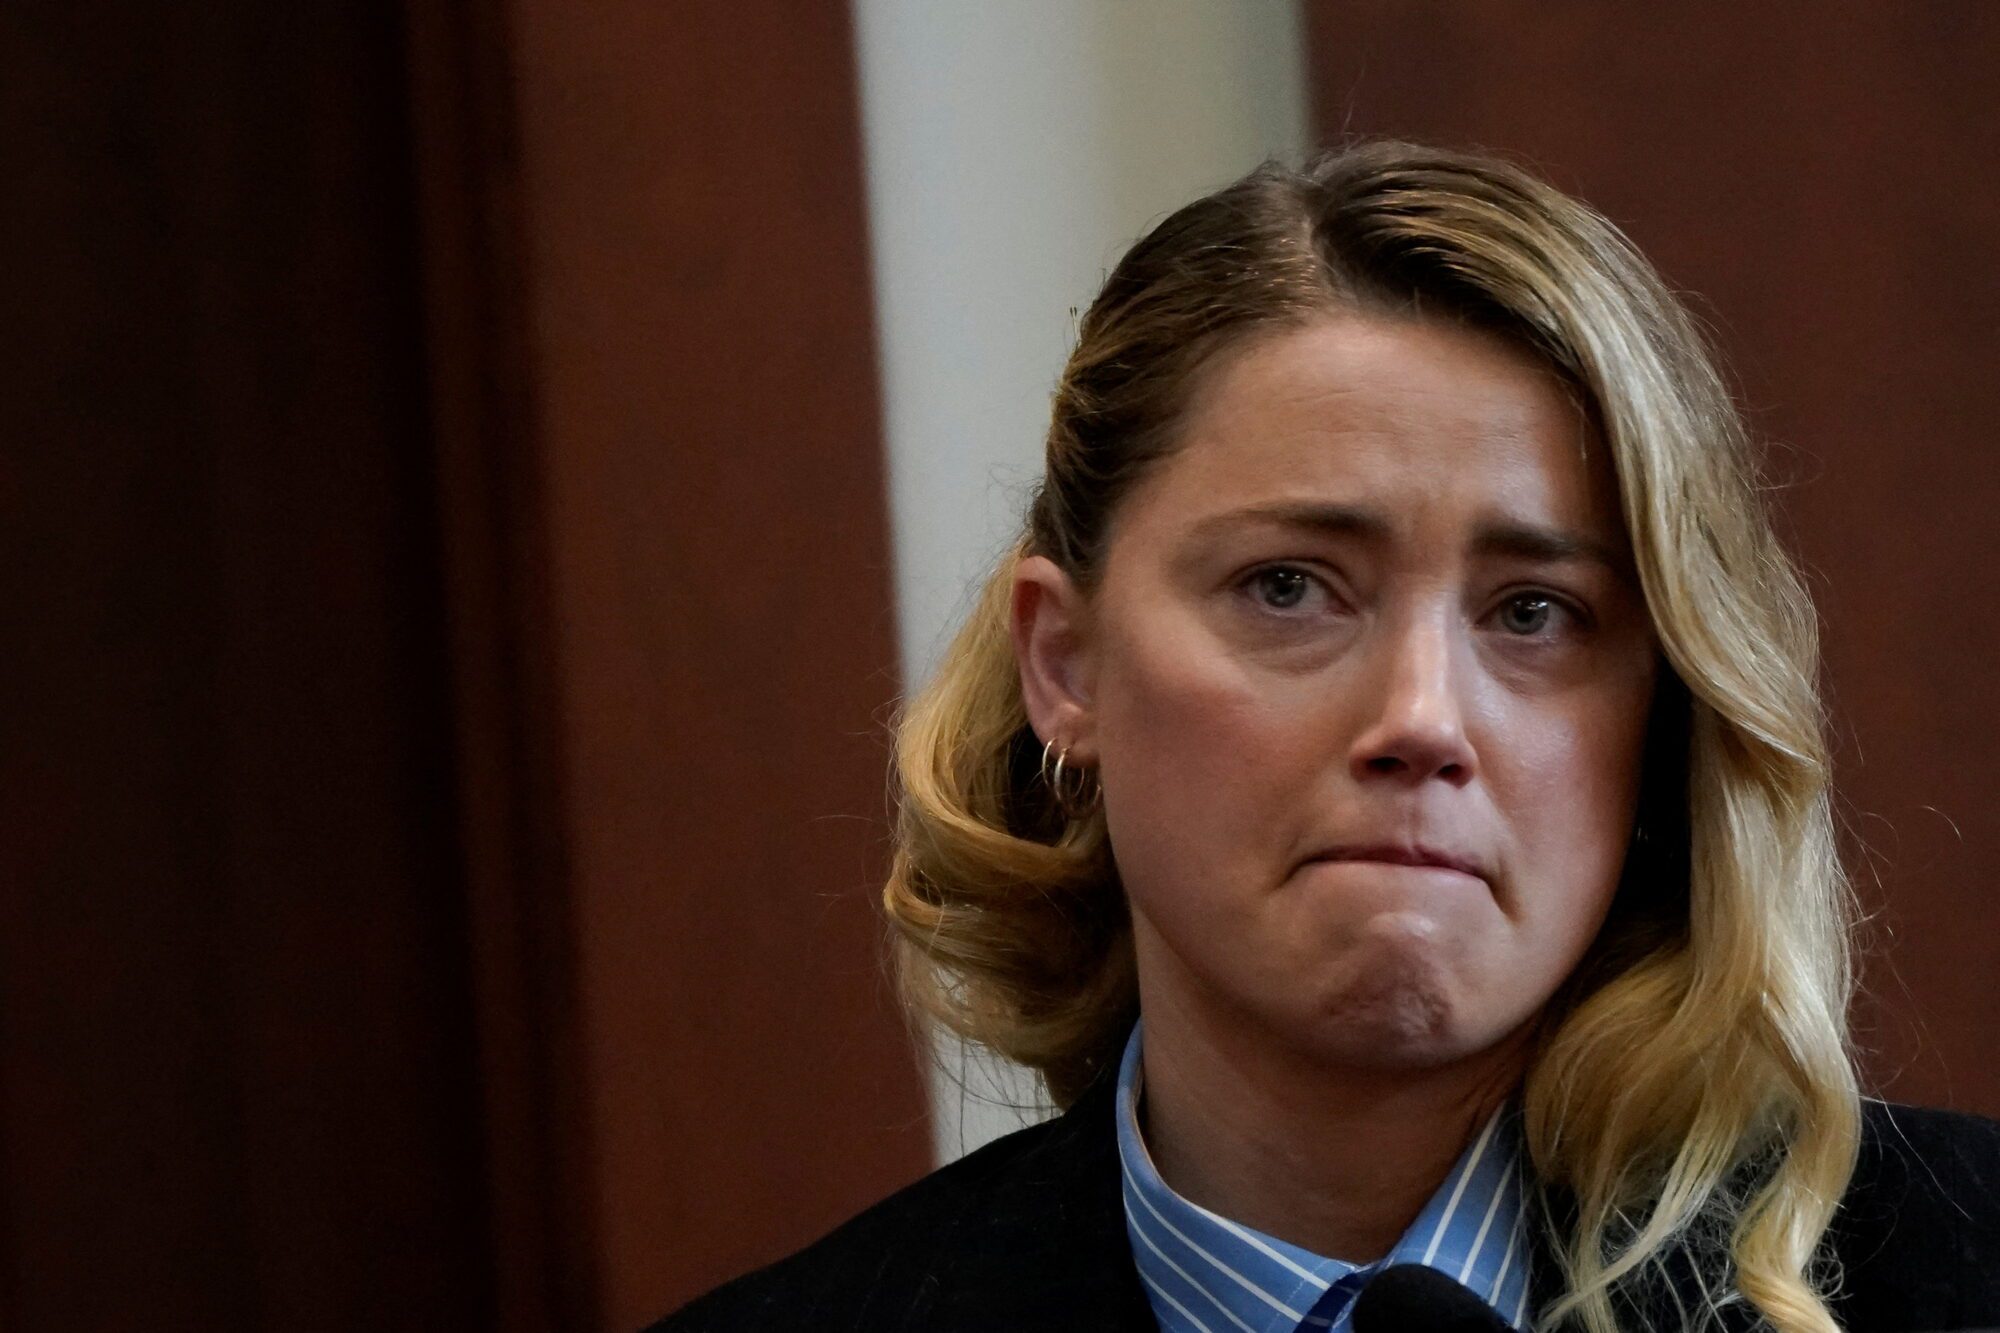 Actor Amber Heard testifies about the first time she says her ex-husband, actor Johnny Depp hit her, at Fairfax County Circuit Court during a defamation case against her by Depp in Fairfax, Virginia, U.S., May 4, 2022. REUTERS/Elizabeth Frantz/Pool